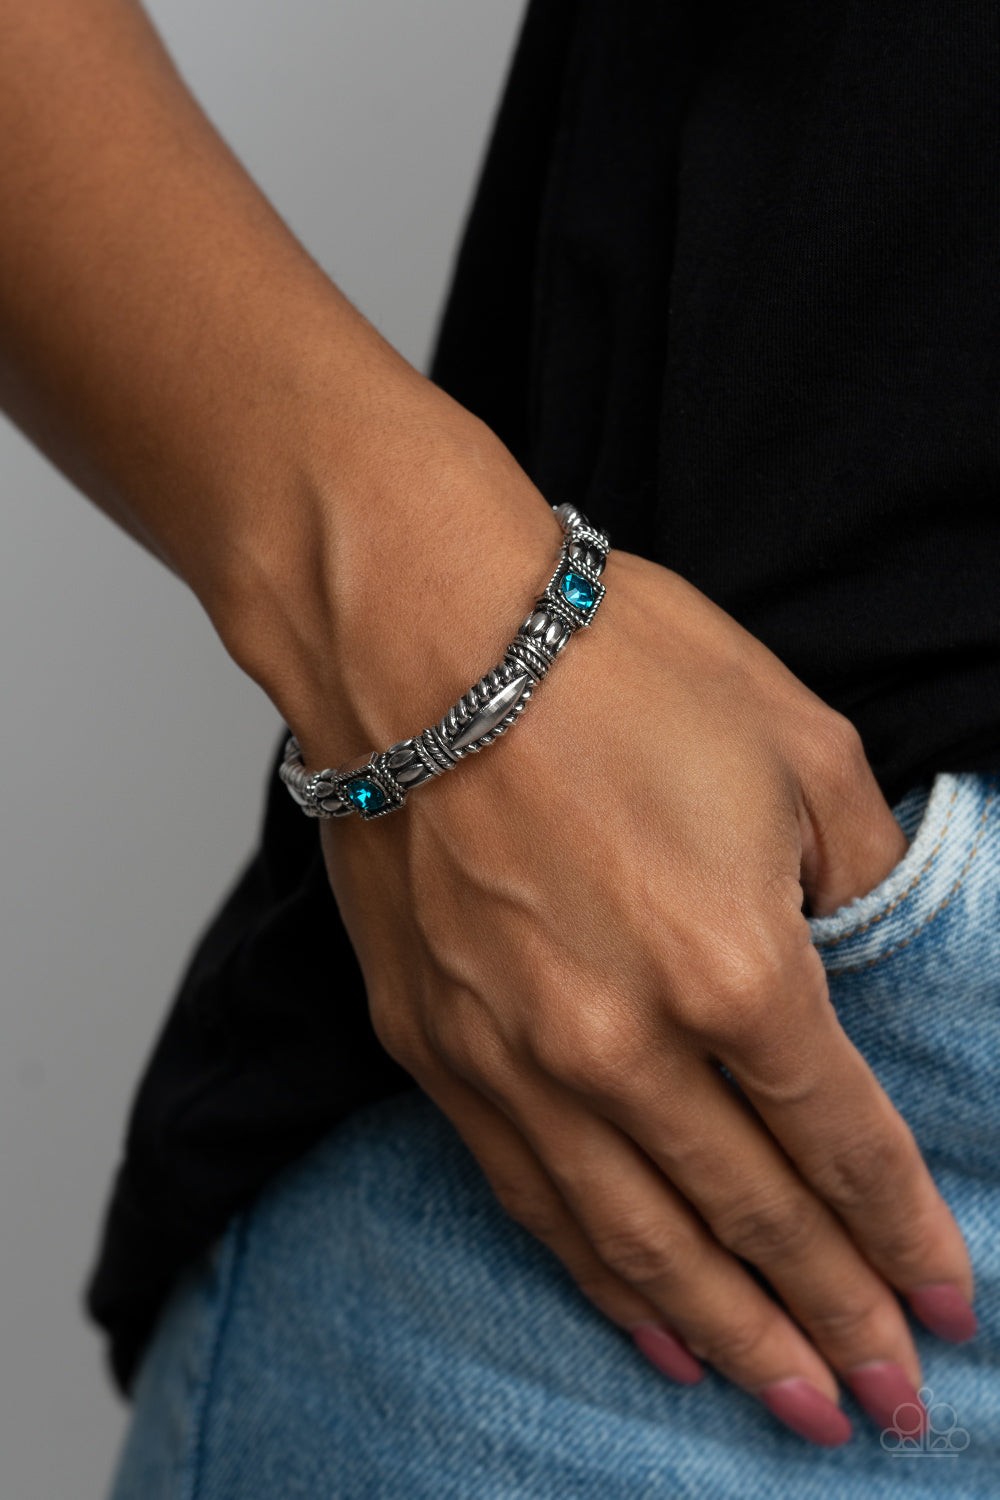 Get This GLOW On The Road - Blue Bracelet Paparazzi